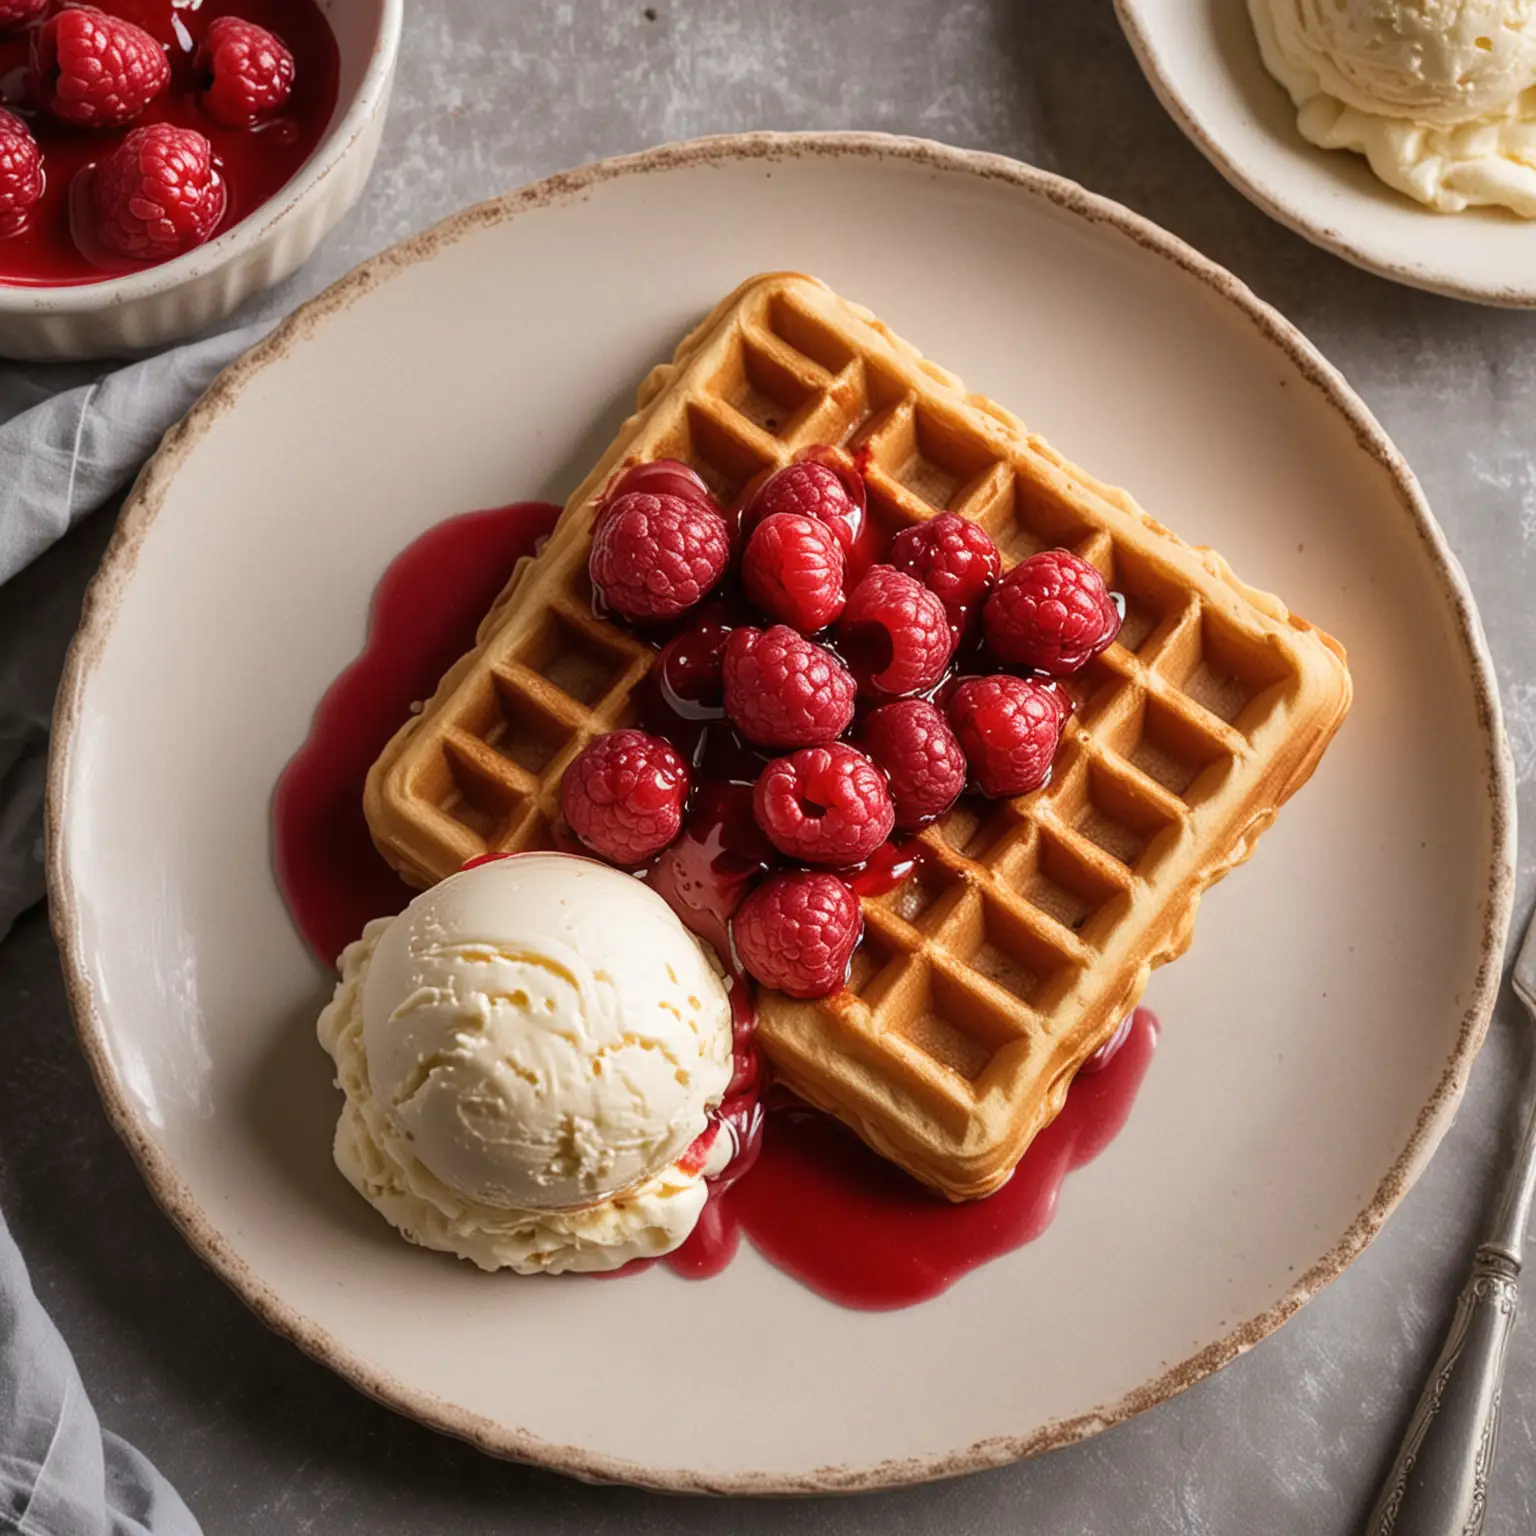 Delicious-Belgian-Waffle-with-Ice-Cream-and-Raspberry-Sauce